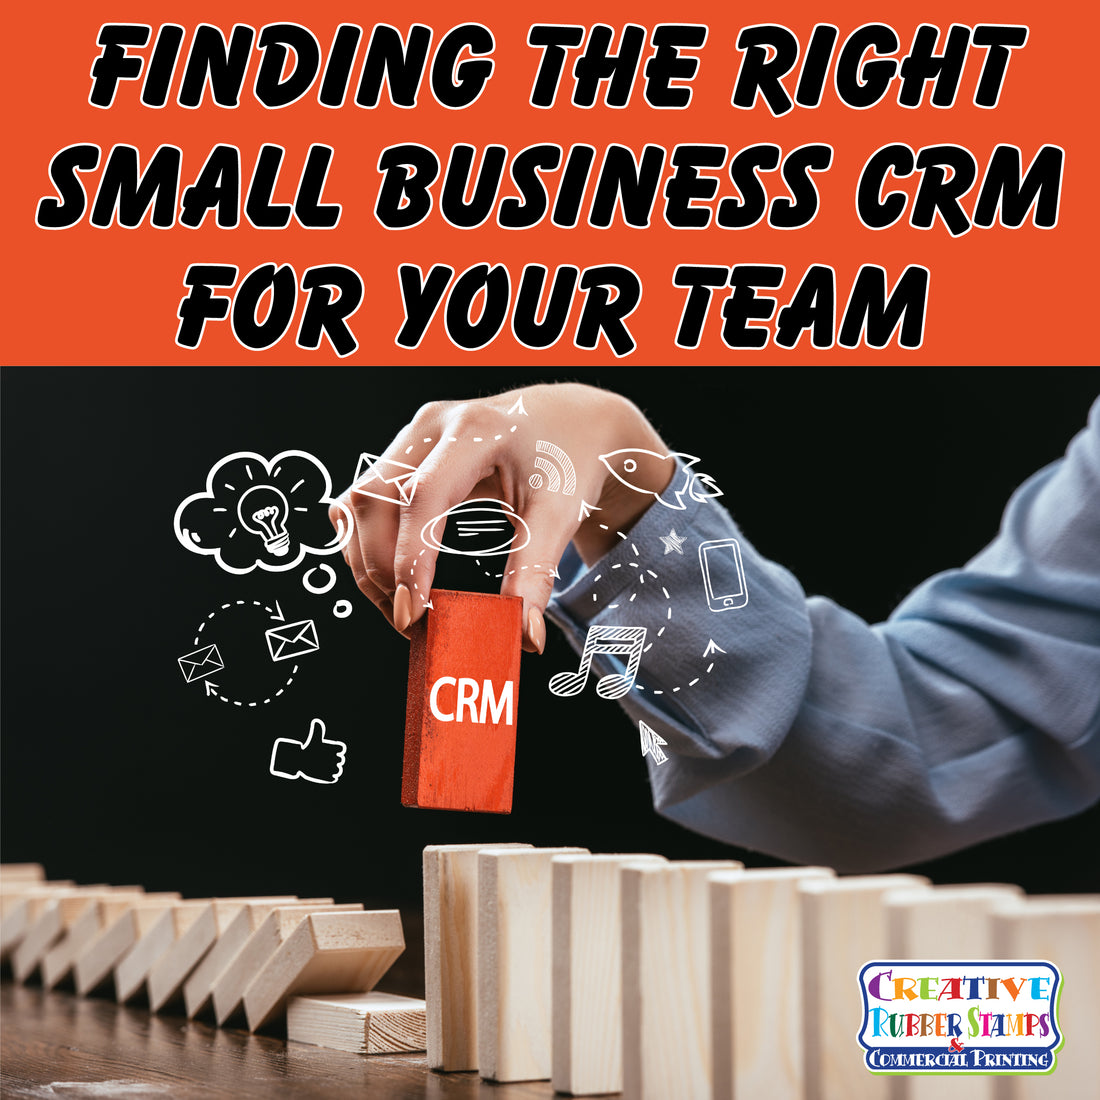 Finding the Right Small Business CRM for Your Team